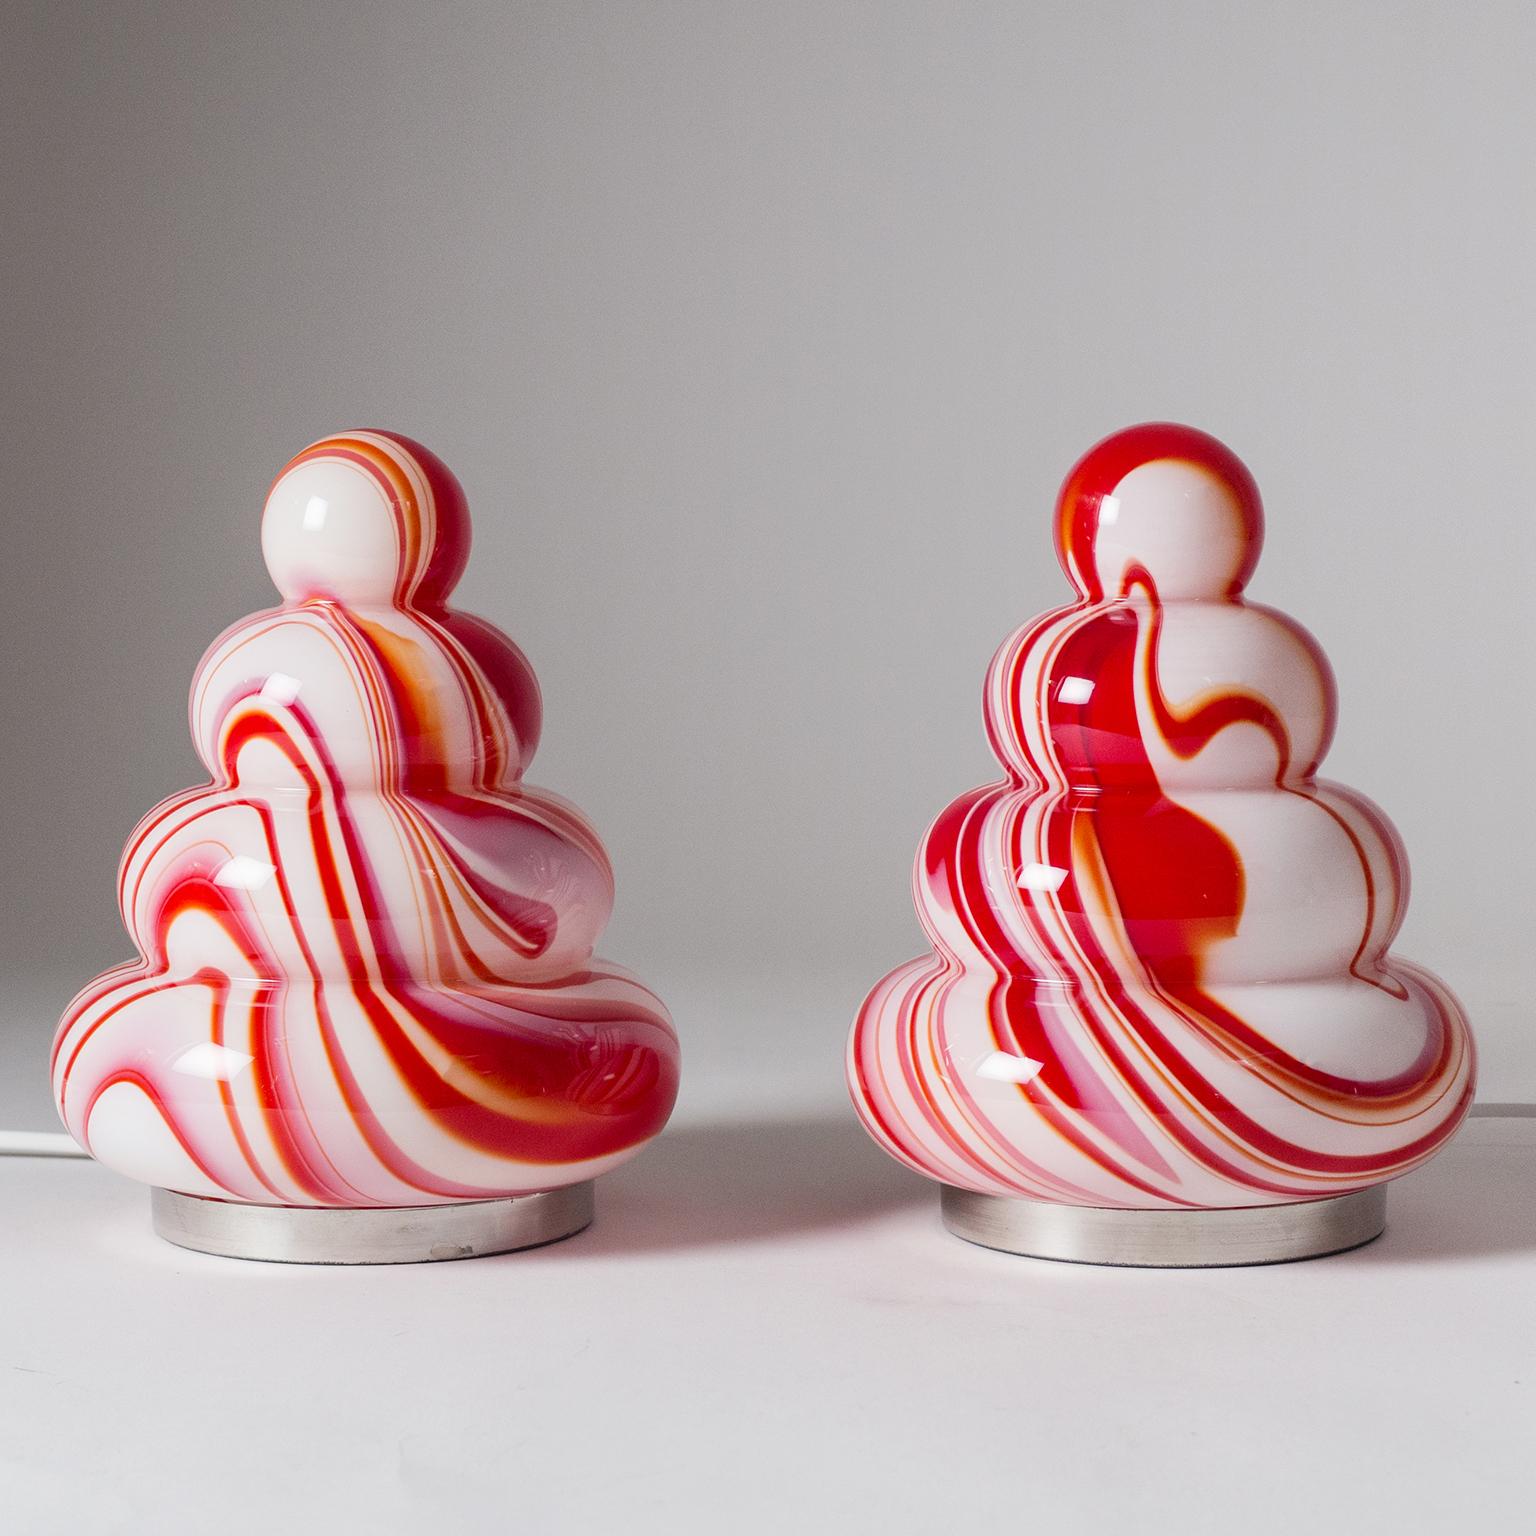 Smashing pair of red and white Murano glass table lamps by Carlo Moretti from the 1960s. The rounded tirered shape and bold swirling color are a clear reference to the Pop-Art aesthetics of the time. Very good original condition, these are a lovely